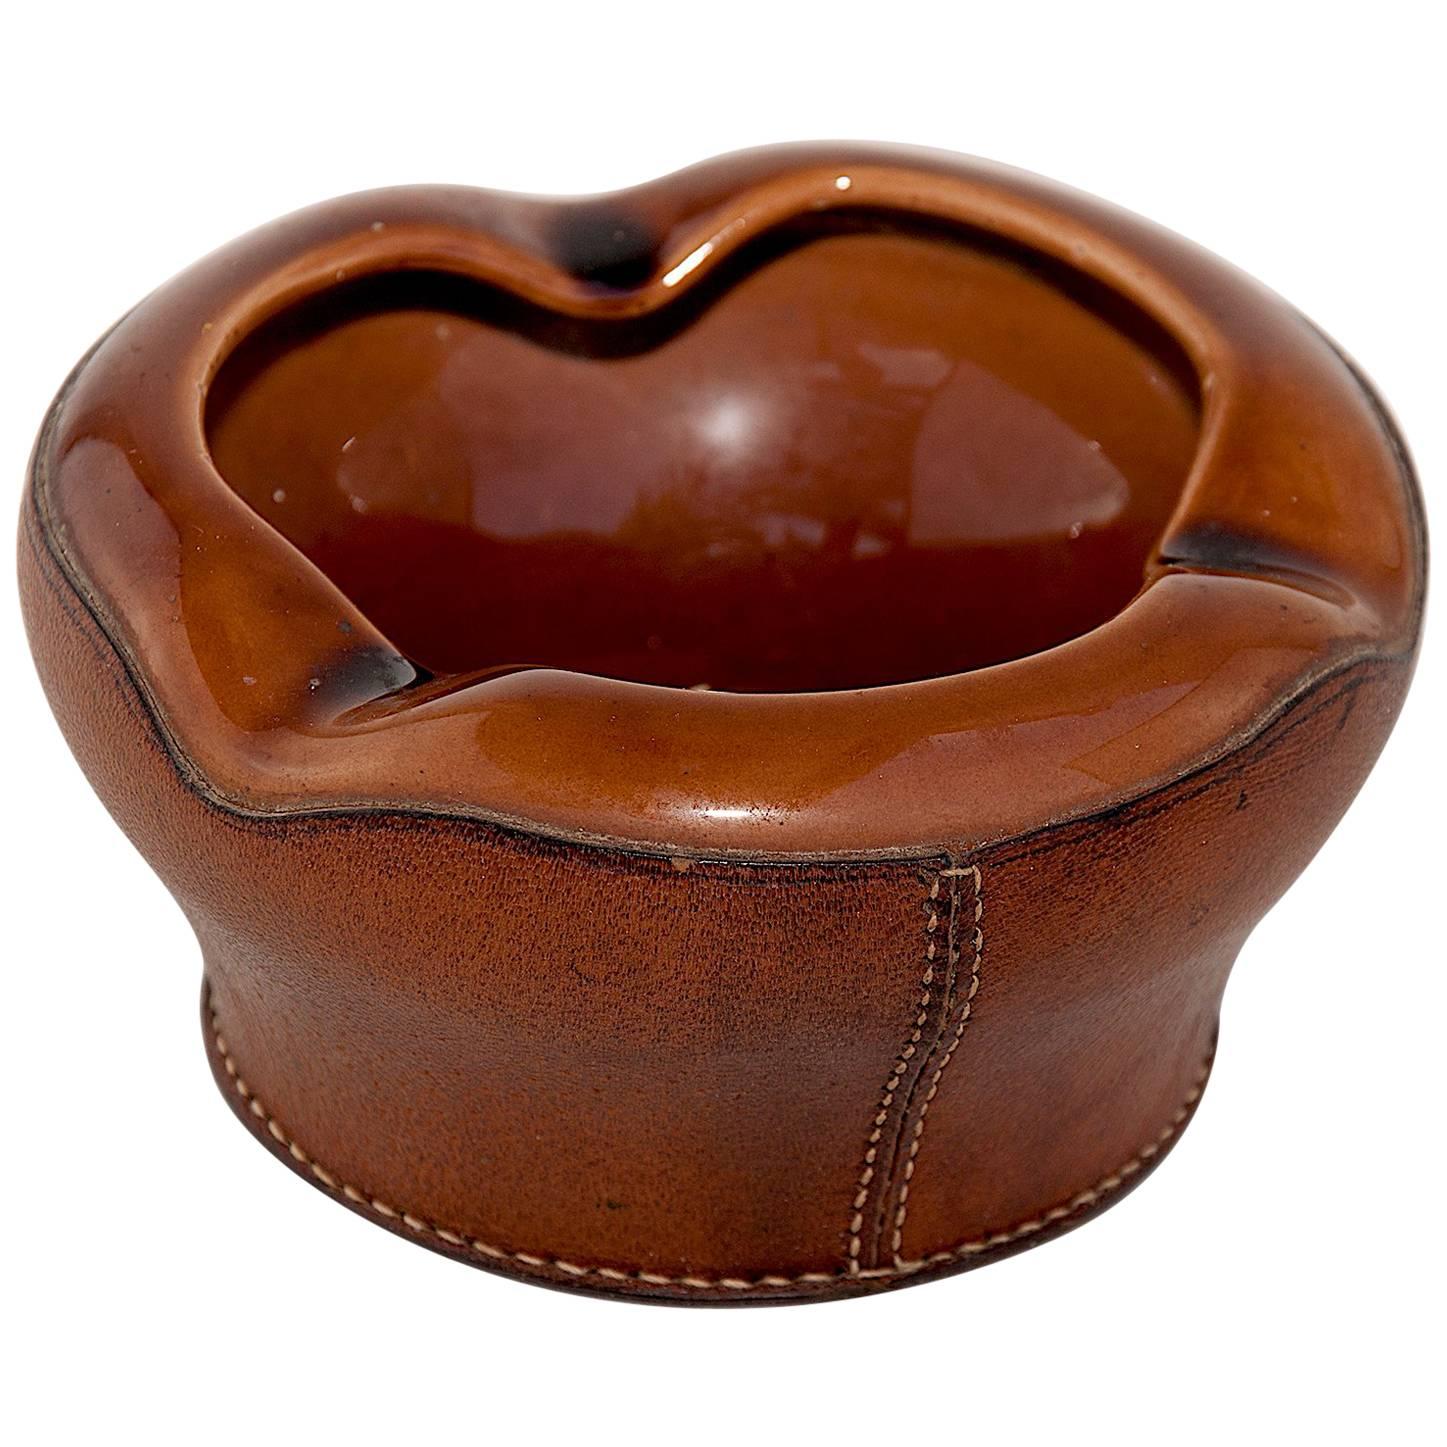 Ashtray in Leather and Ceramic by Longchamp Paris